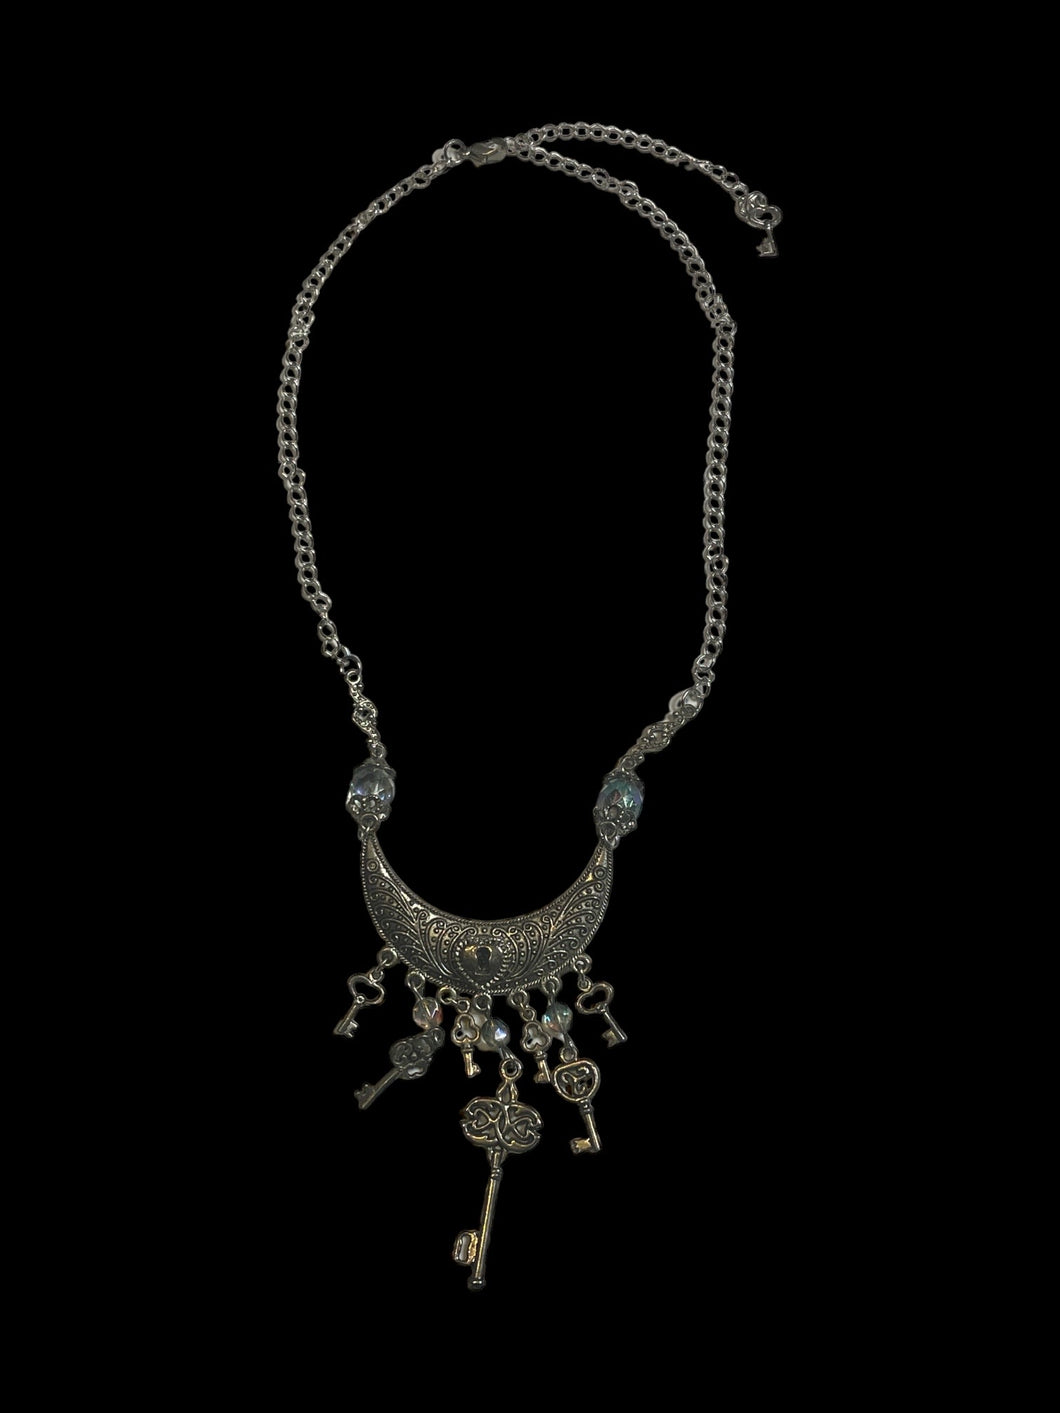 Silver-like crescent, lock & key, & aura beading necklace w/ fully adjustable lobster clasp chain